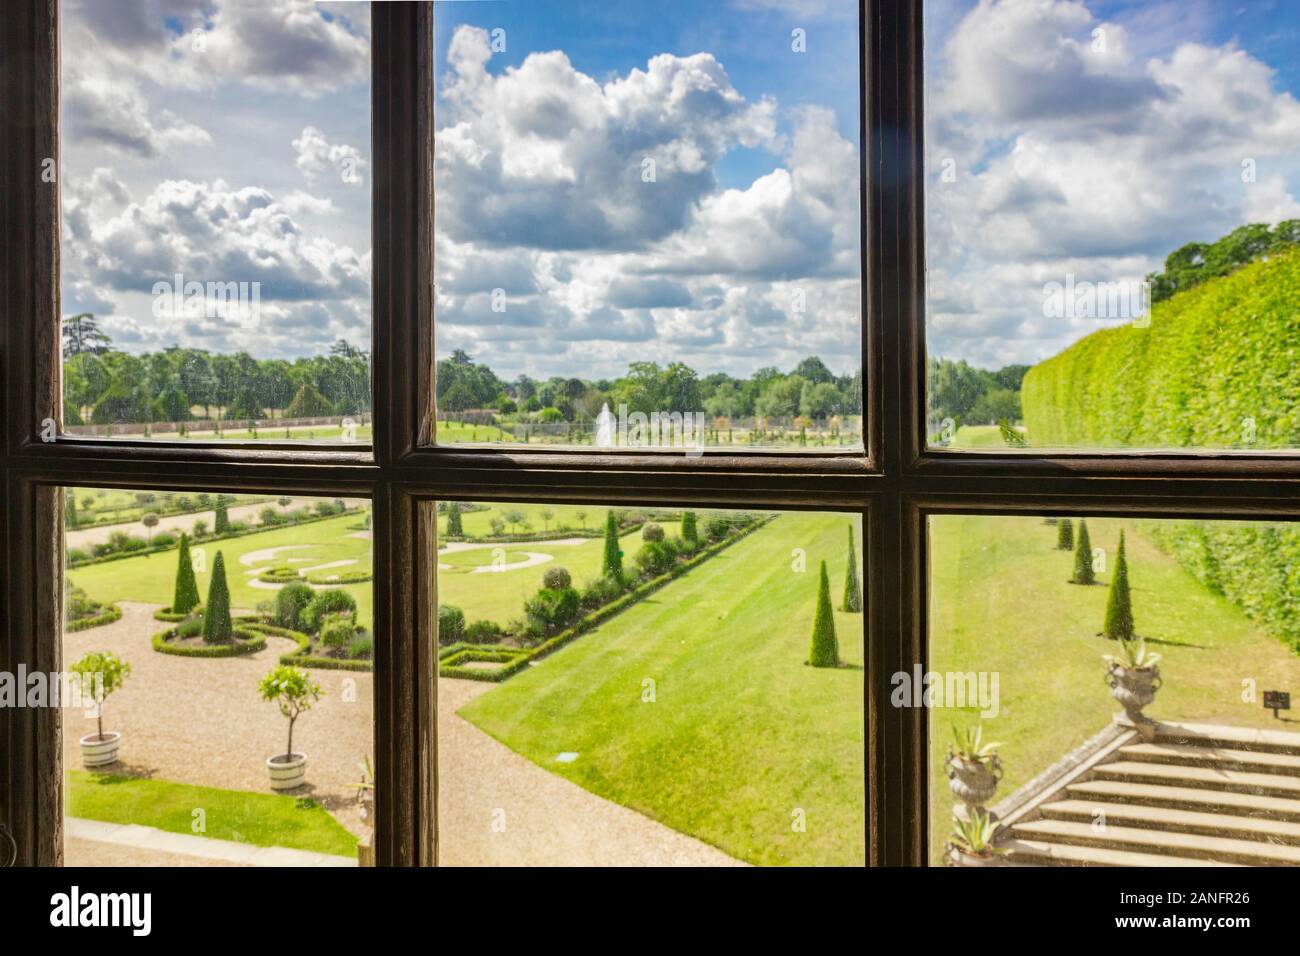 9 June 2019: Richmond, UK - A view through a window of Hampton Court Palace, of the Privy Garden. Focus on window frame, best used small. Stock Photo